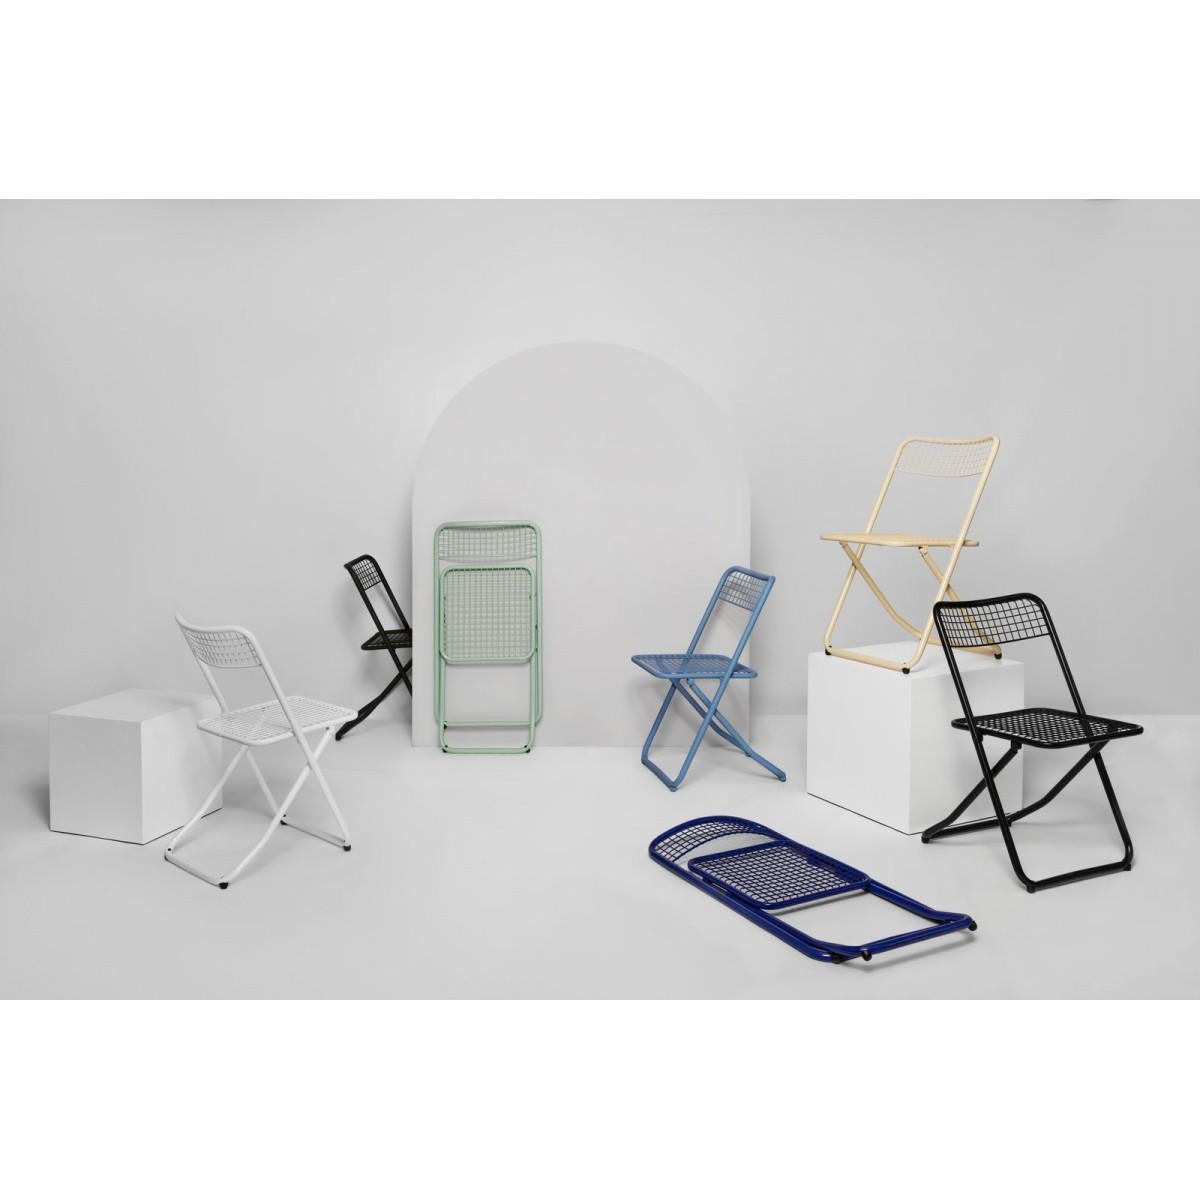 New Folding Iron Chair Beige 1013 by Houtique signed by Federico Giner, Spain 3